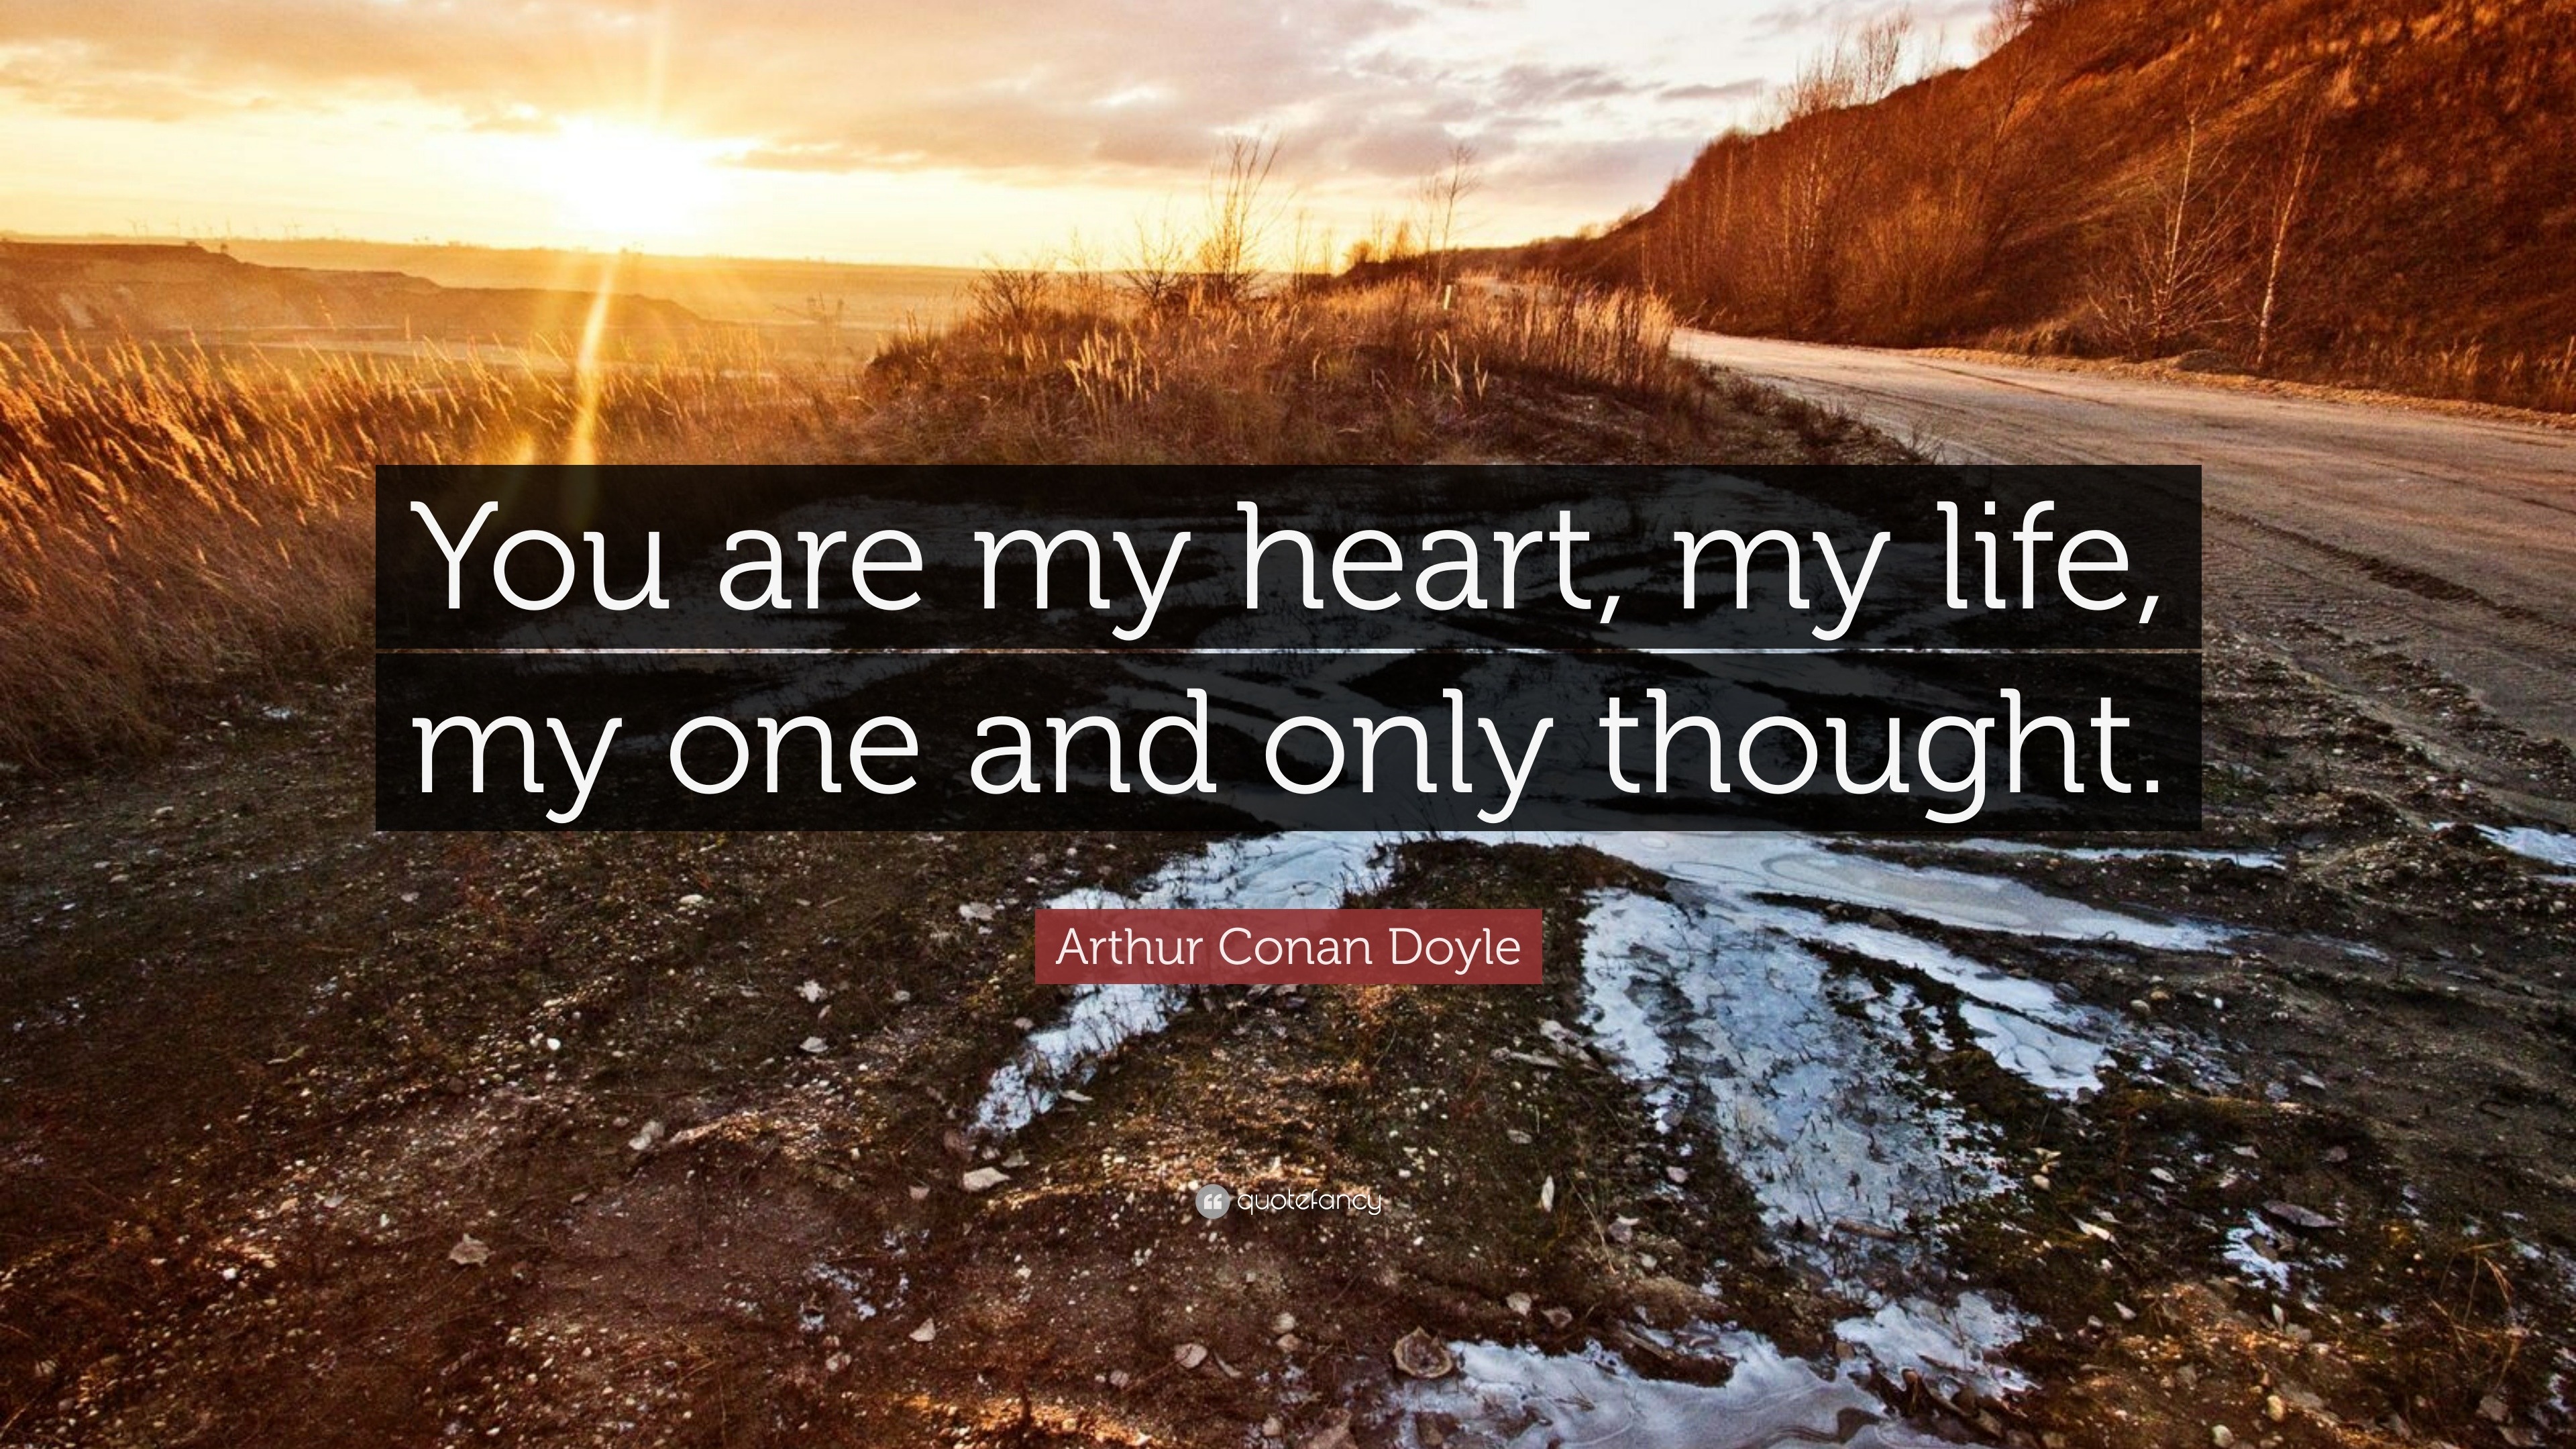 Arthur Conan Doyle Quote “You are my heart my life my one